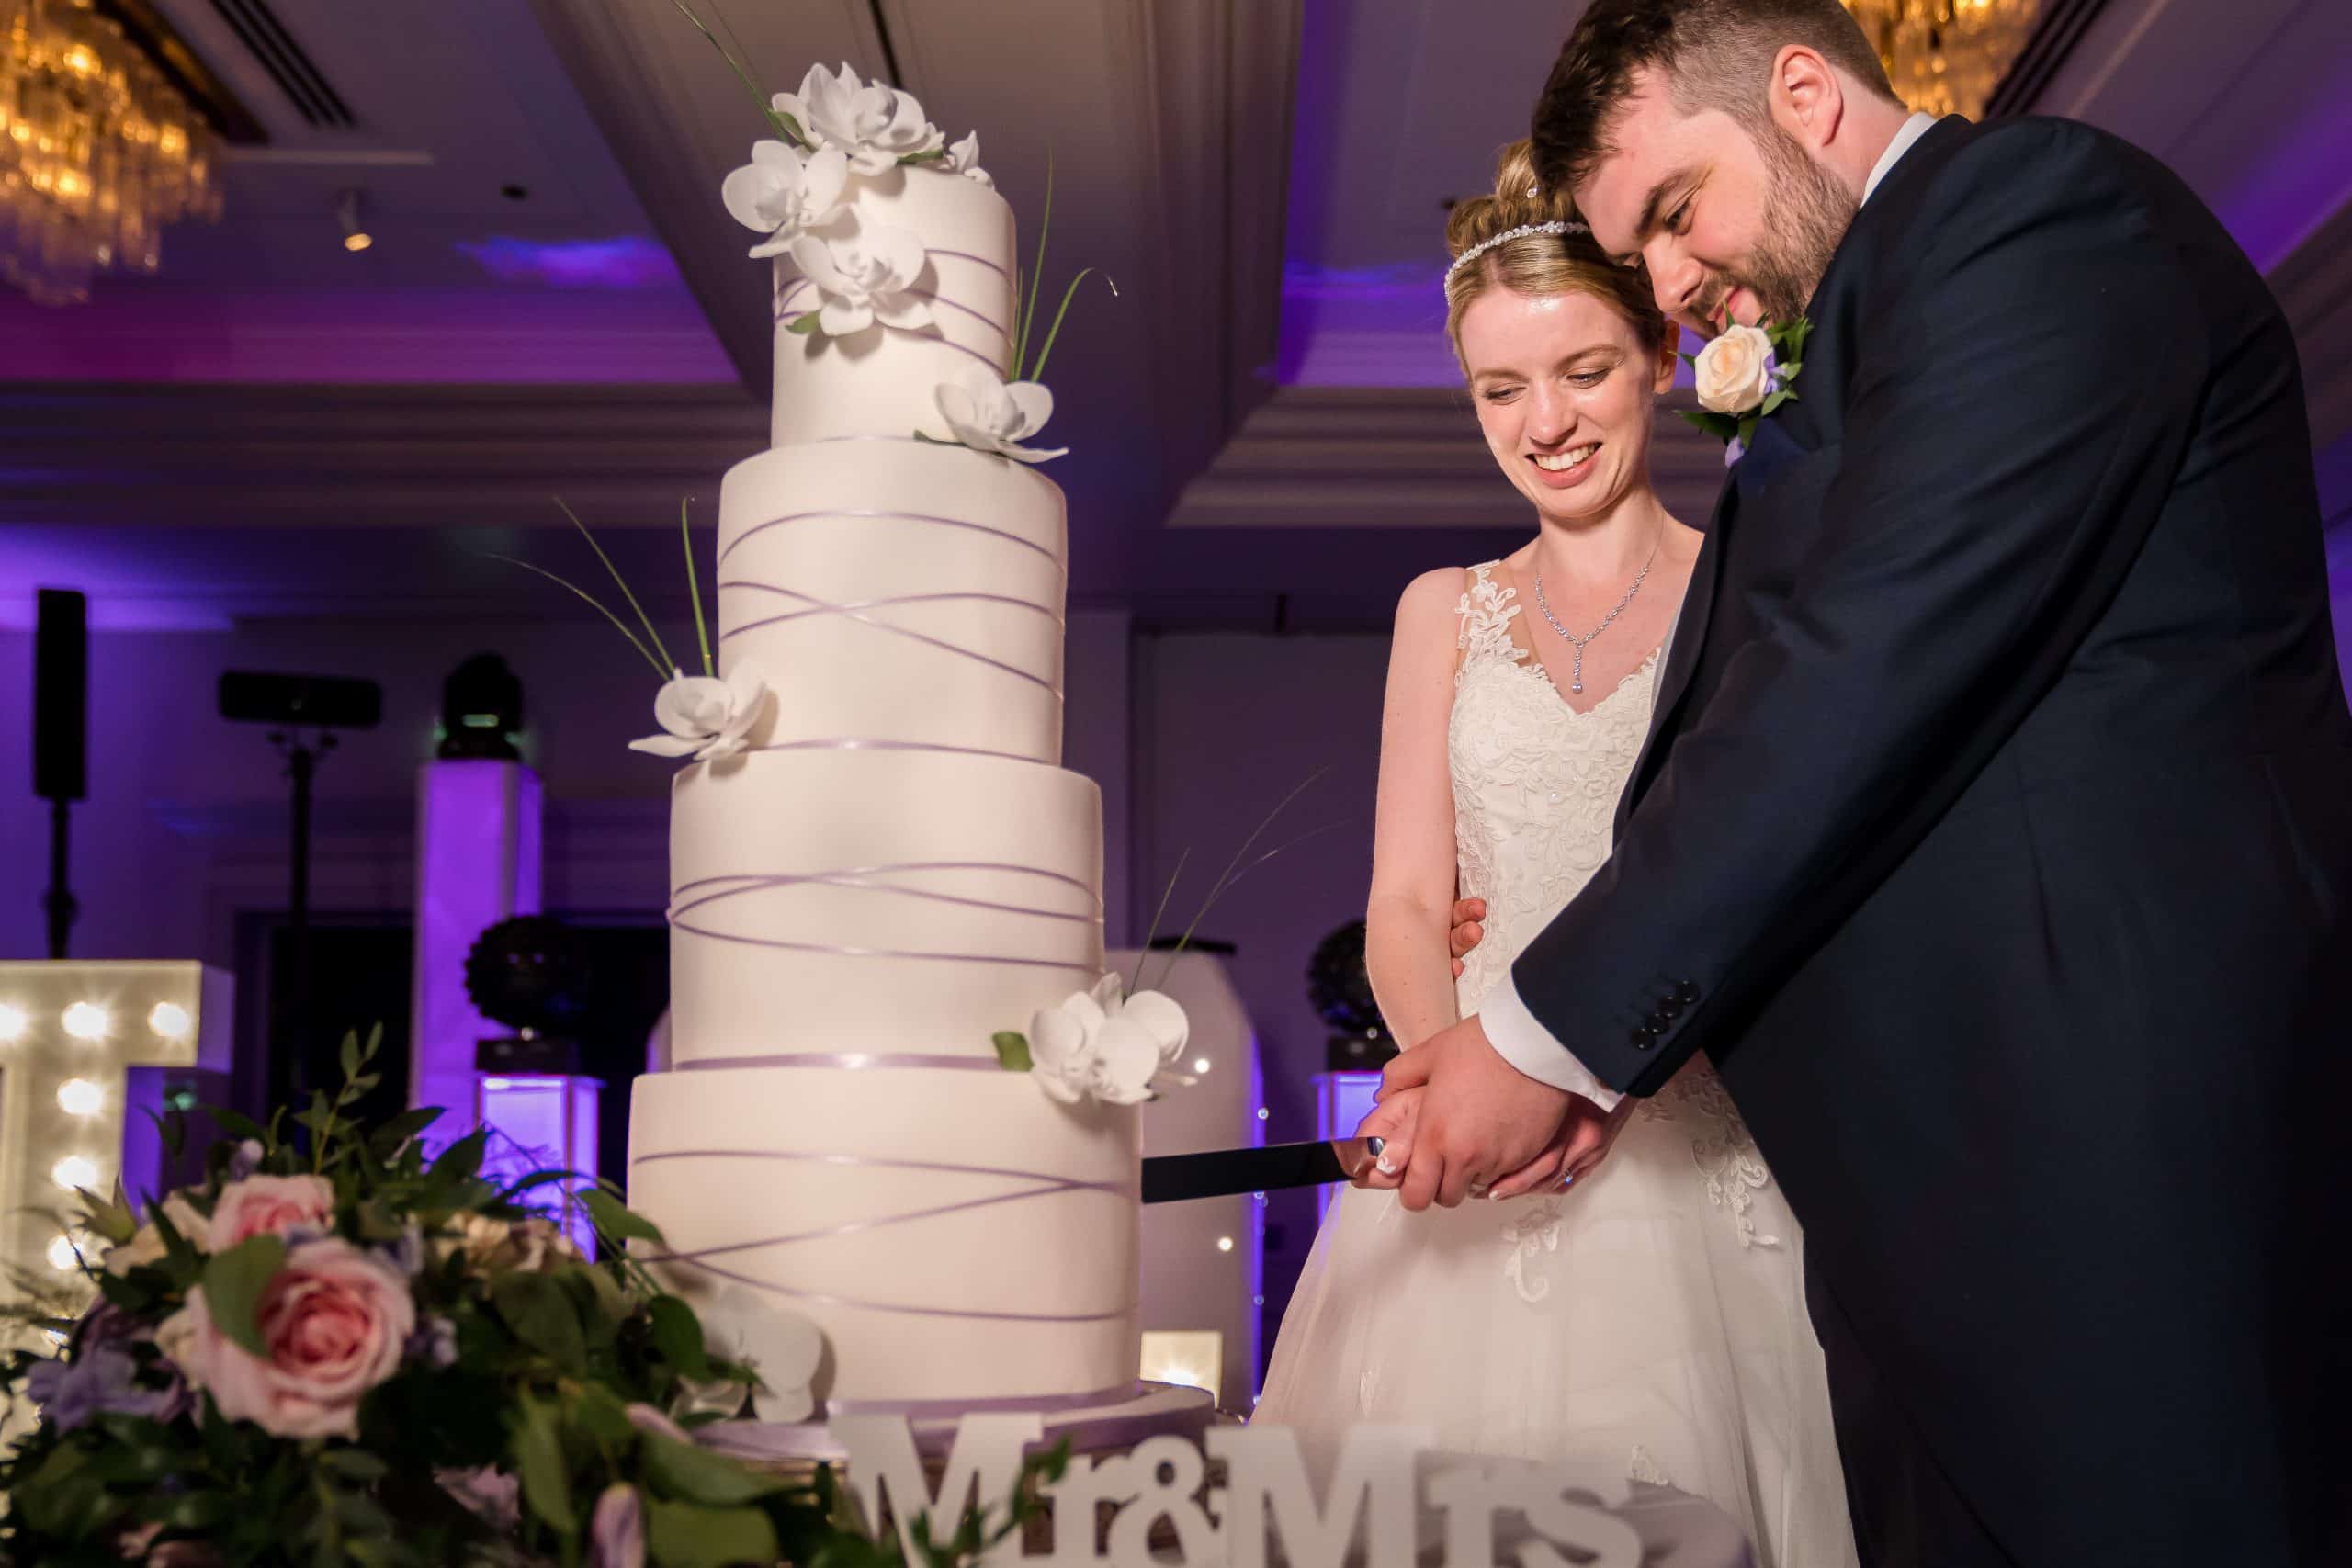 couple-cutting-wedding-cake-at-sopwell-house-st-albans